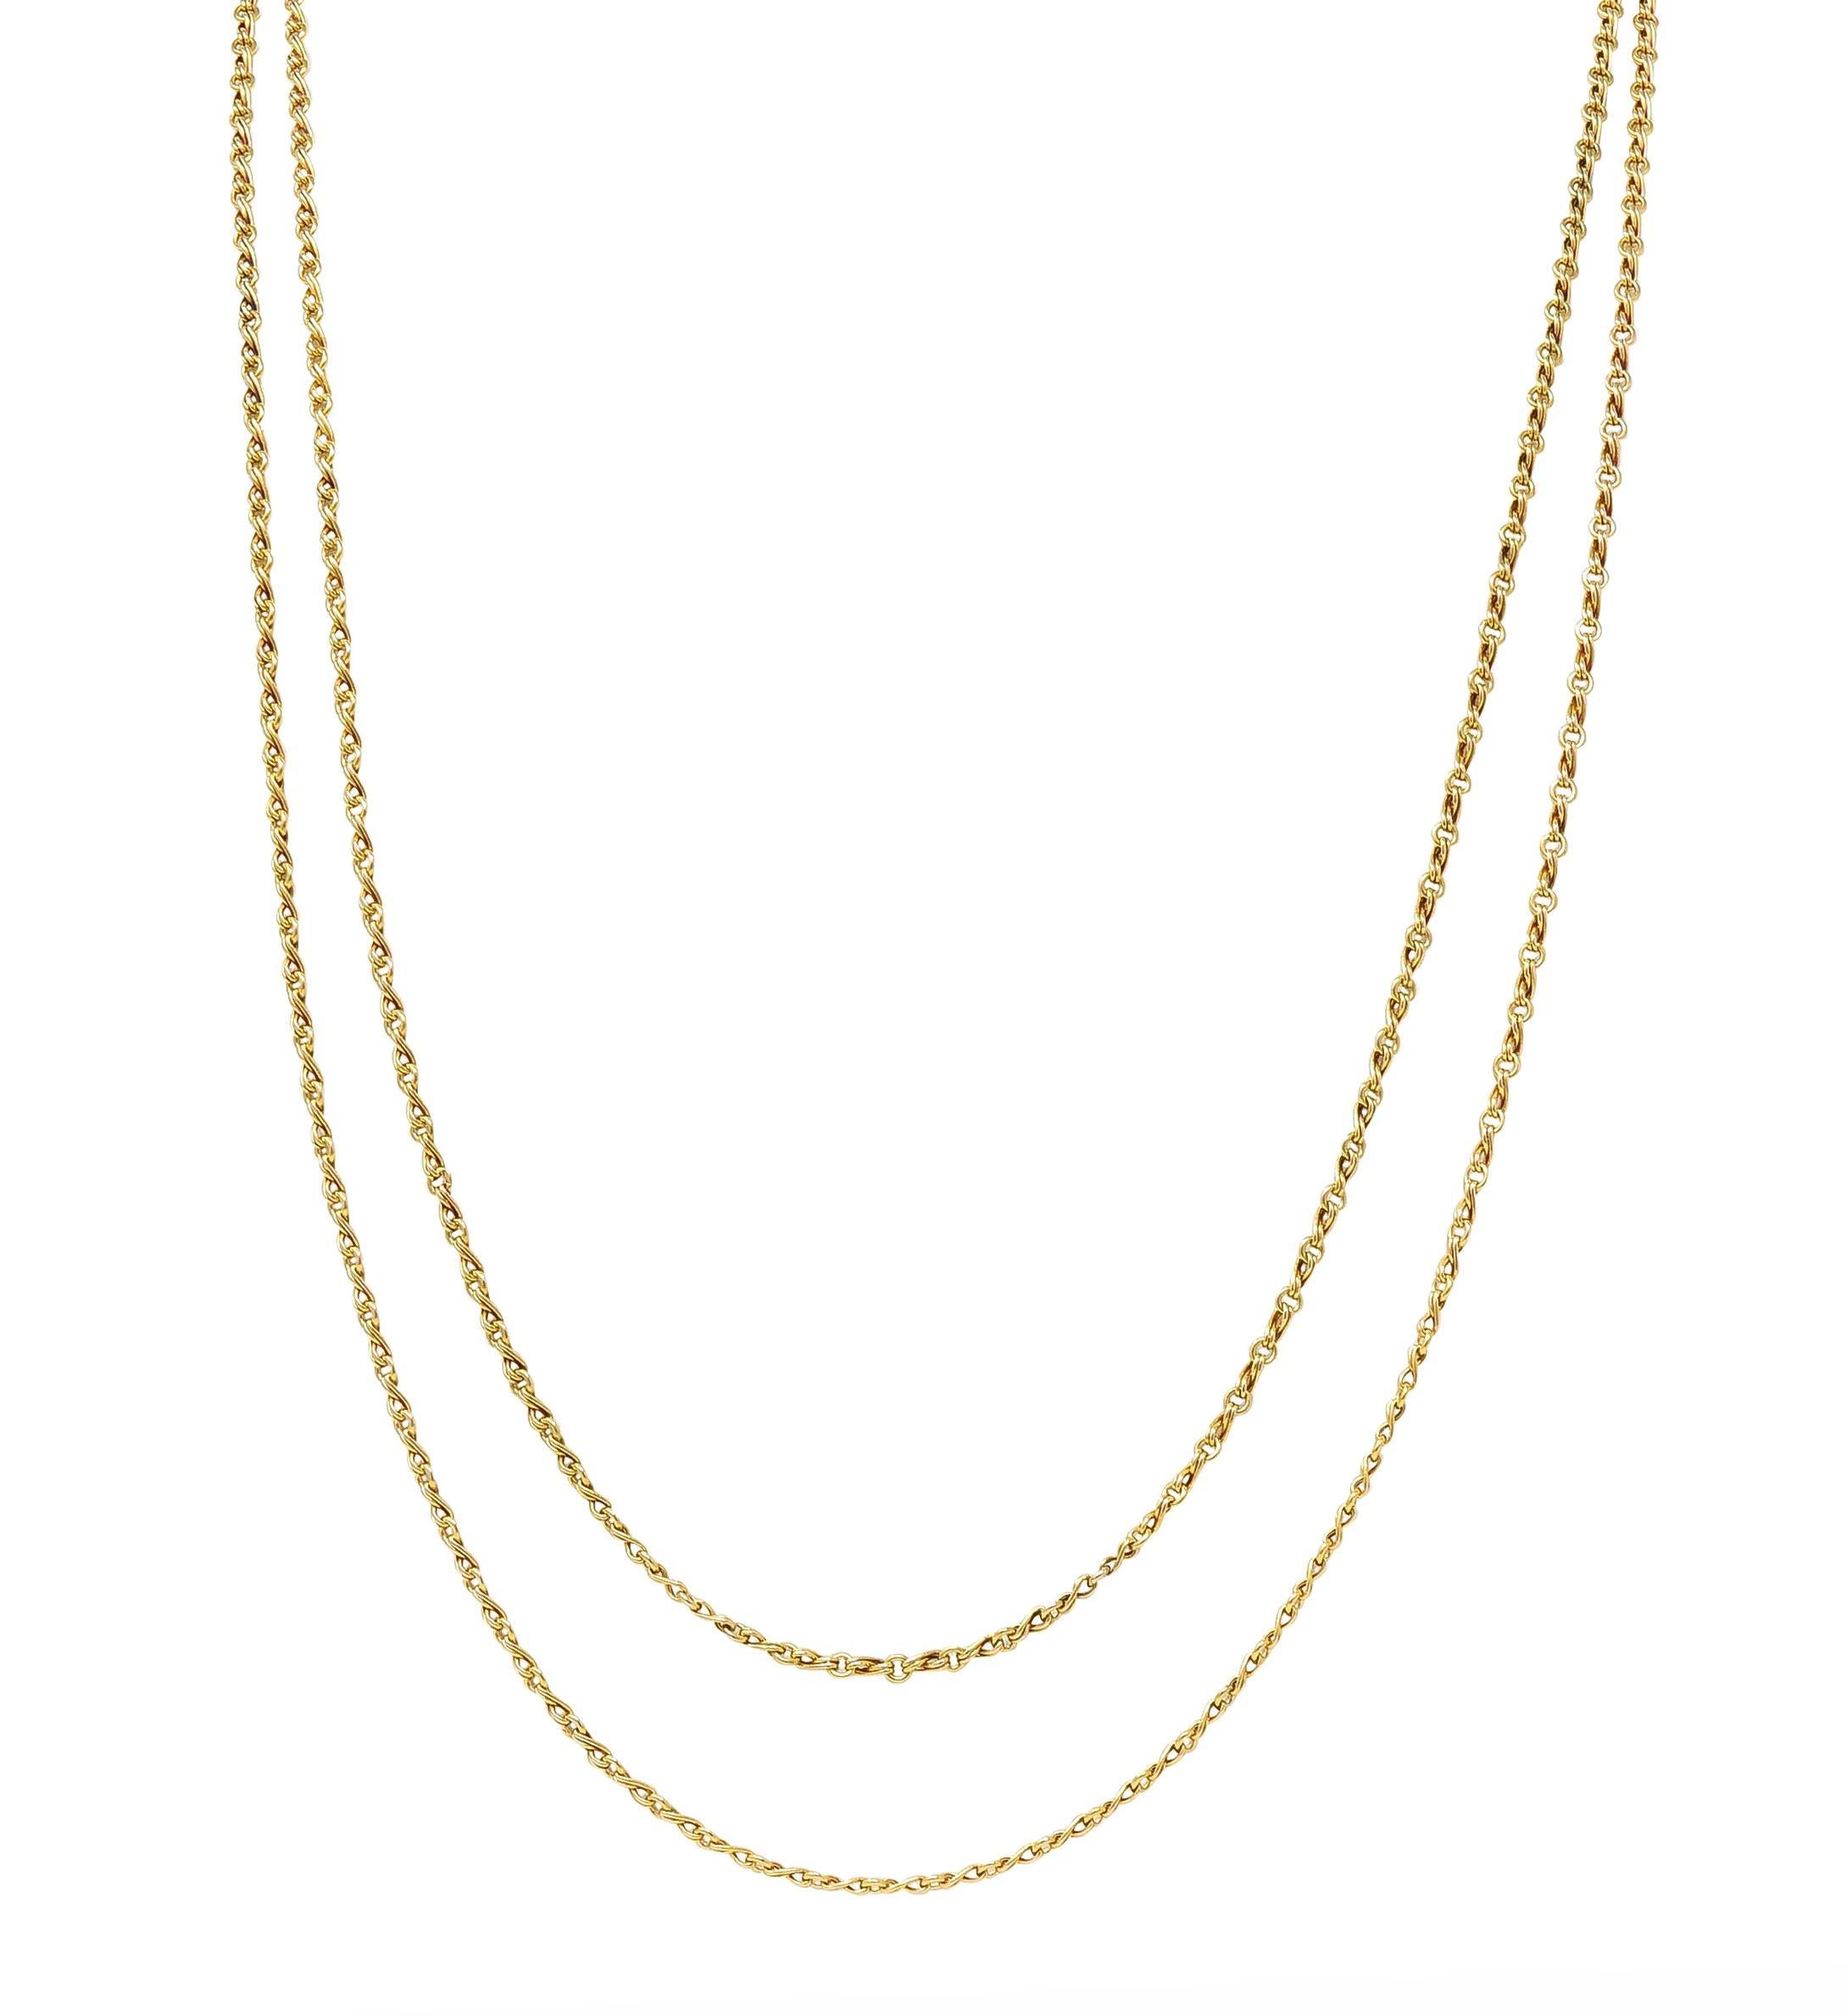 Victorian 18 Karat Yellow Gold Infinity Link 66.5 IN Long Antique Chain Necklace For Sale 2